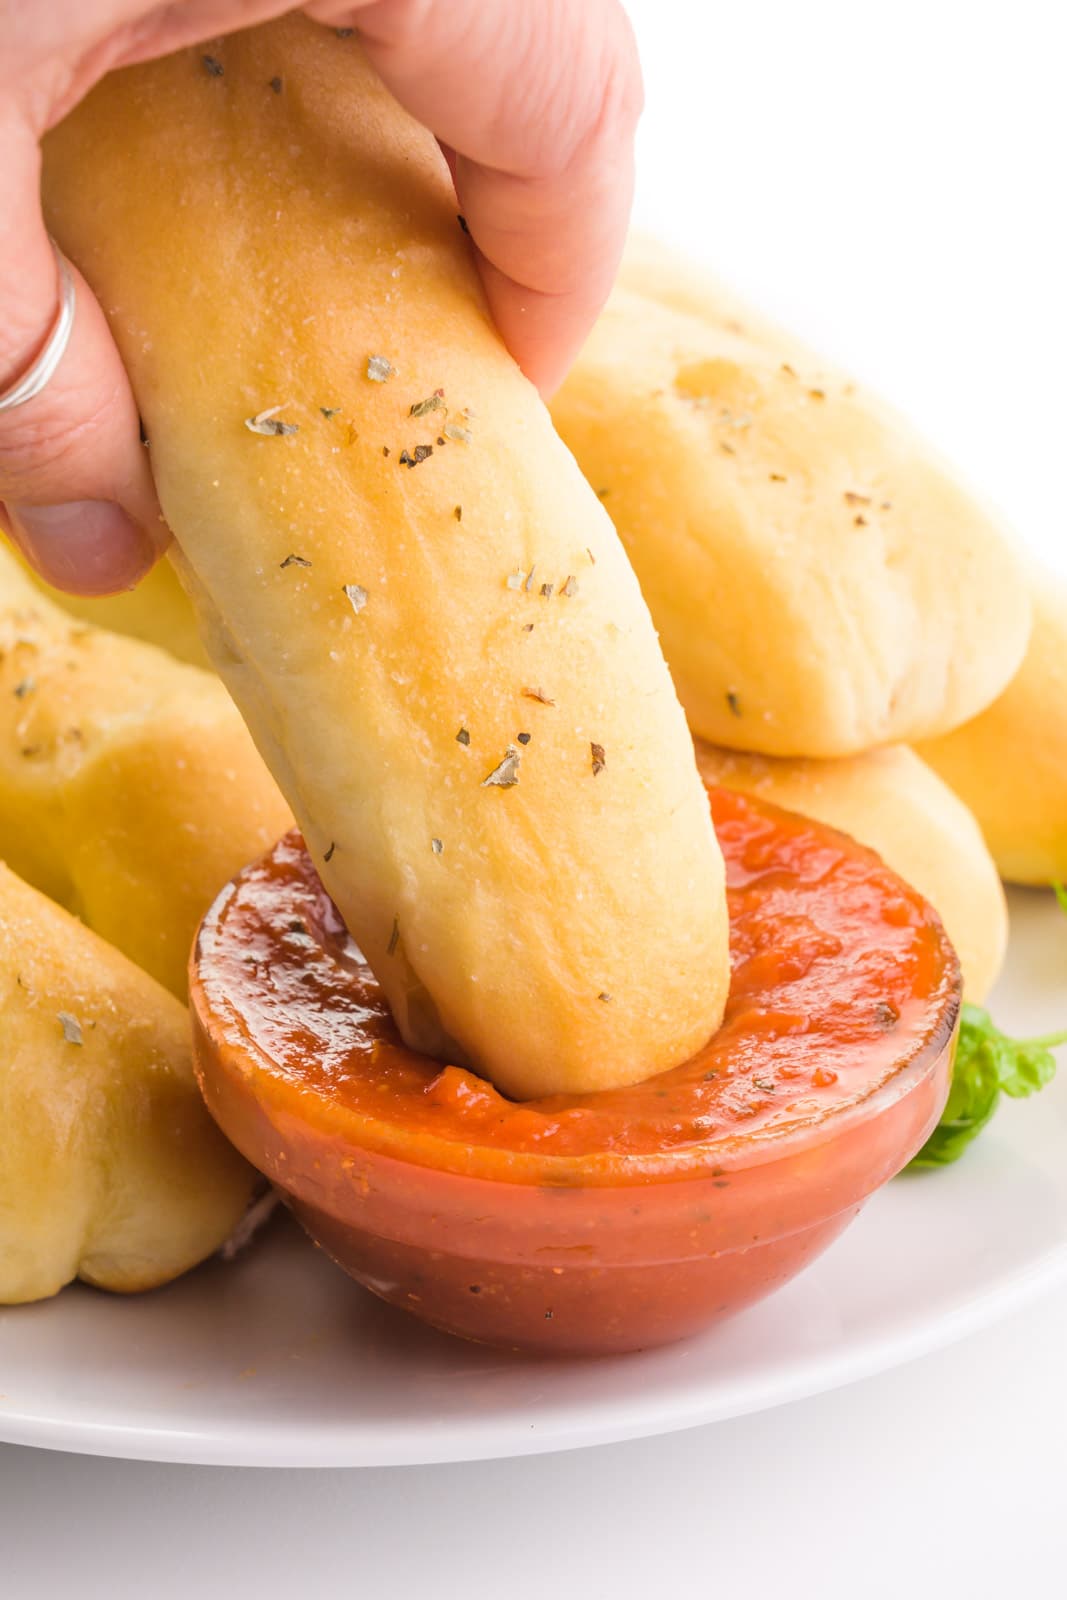 A hand holds a breadstick, dipping it in marinara sauce. There are more breadsticks in the background.